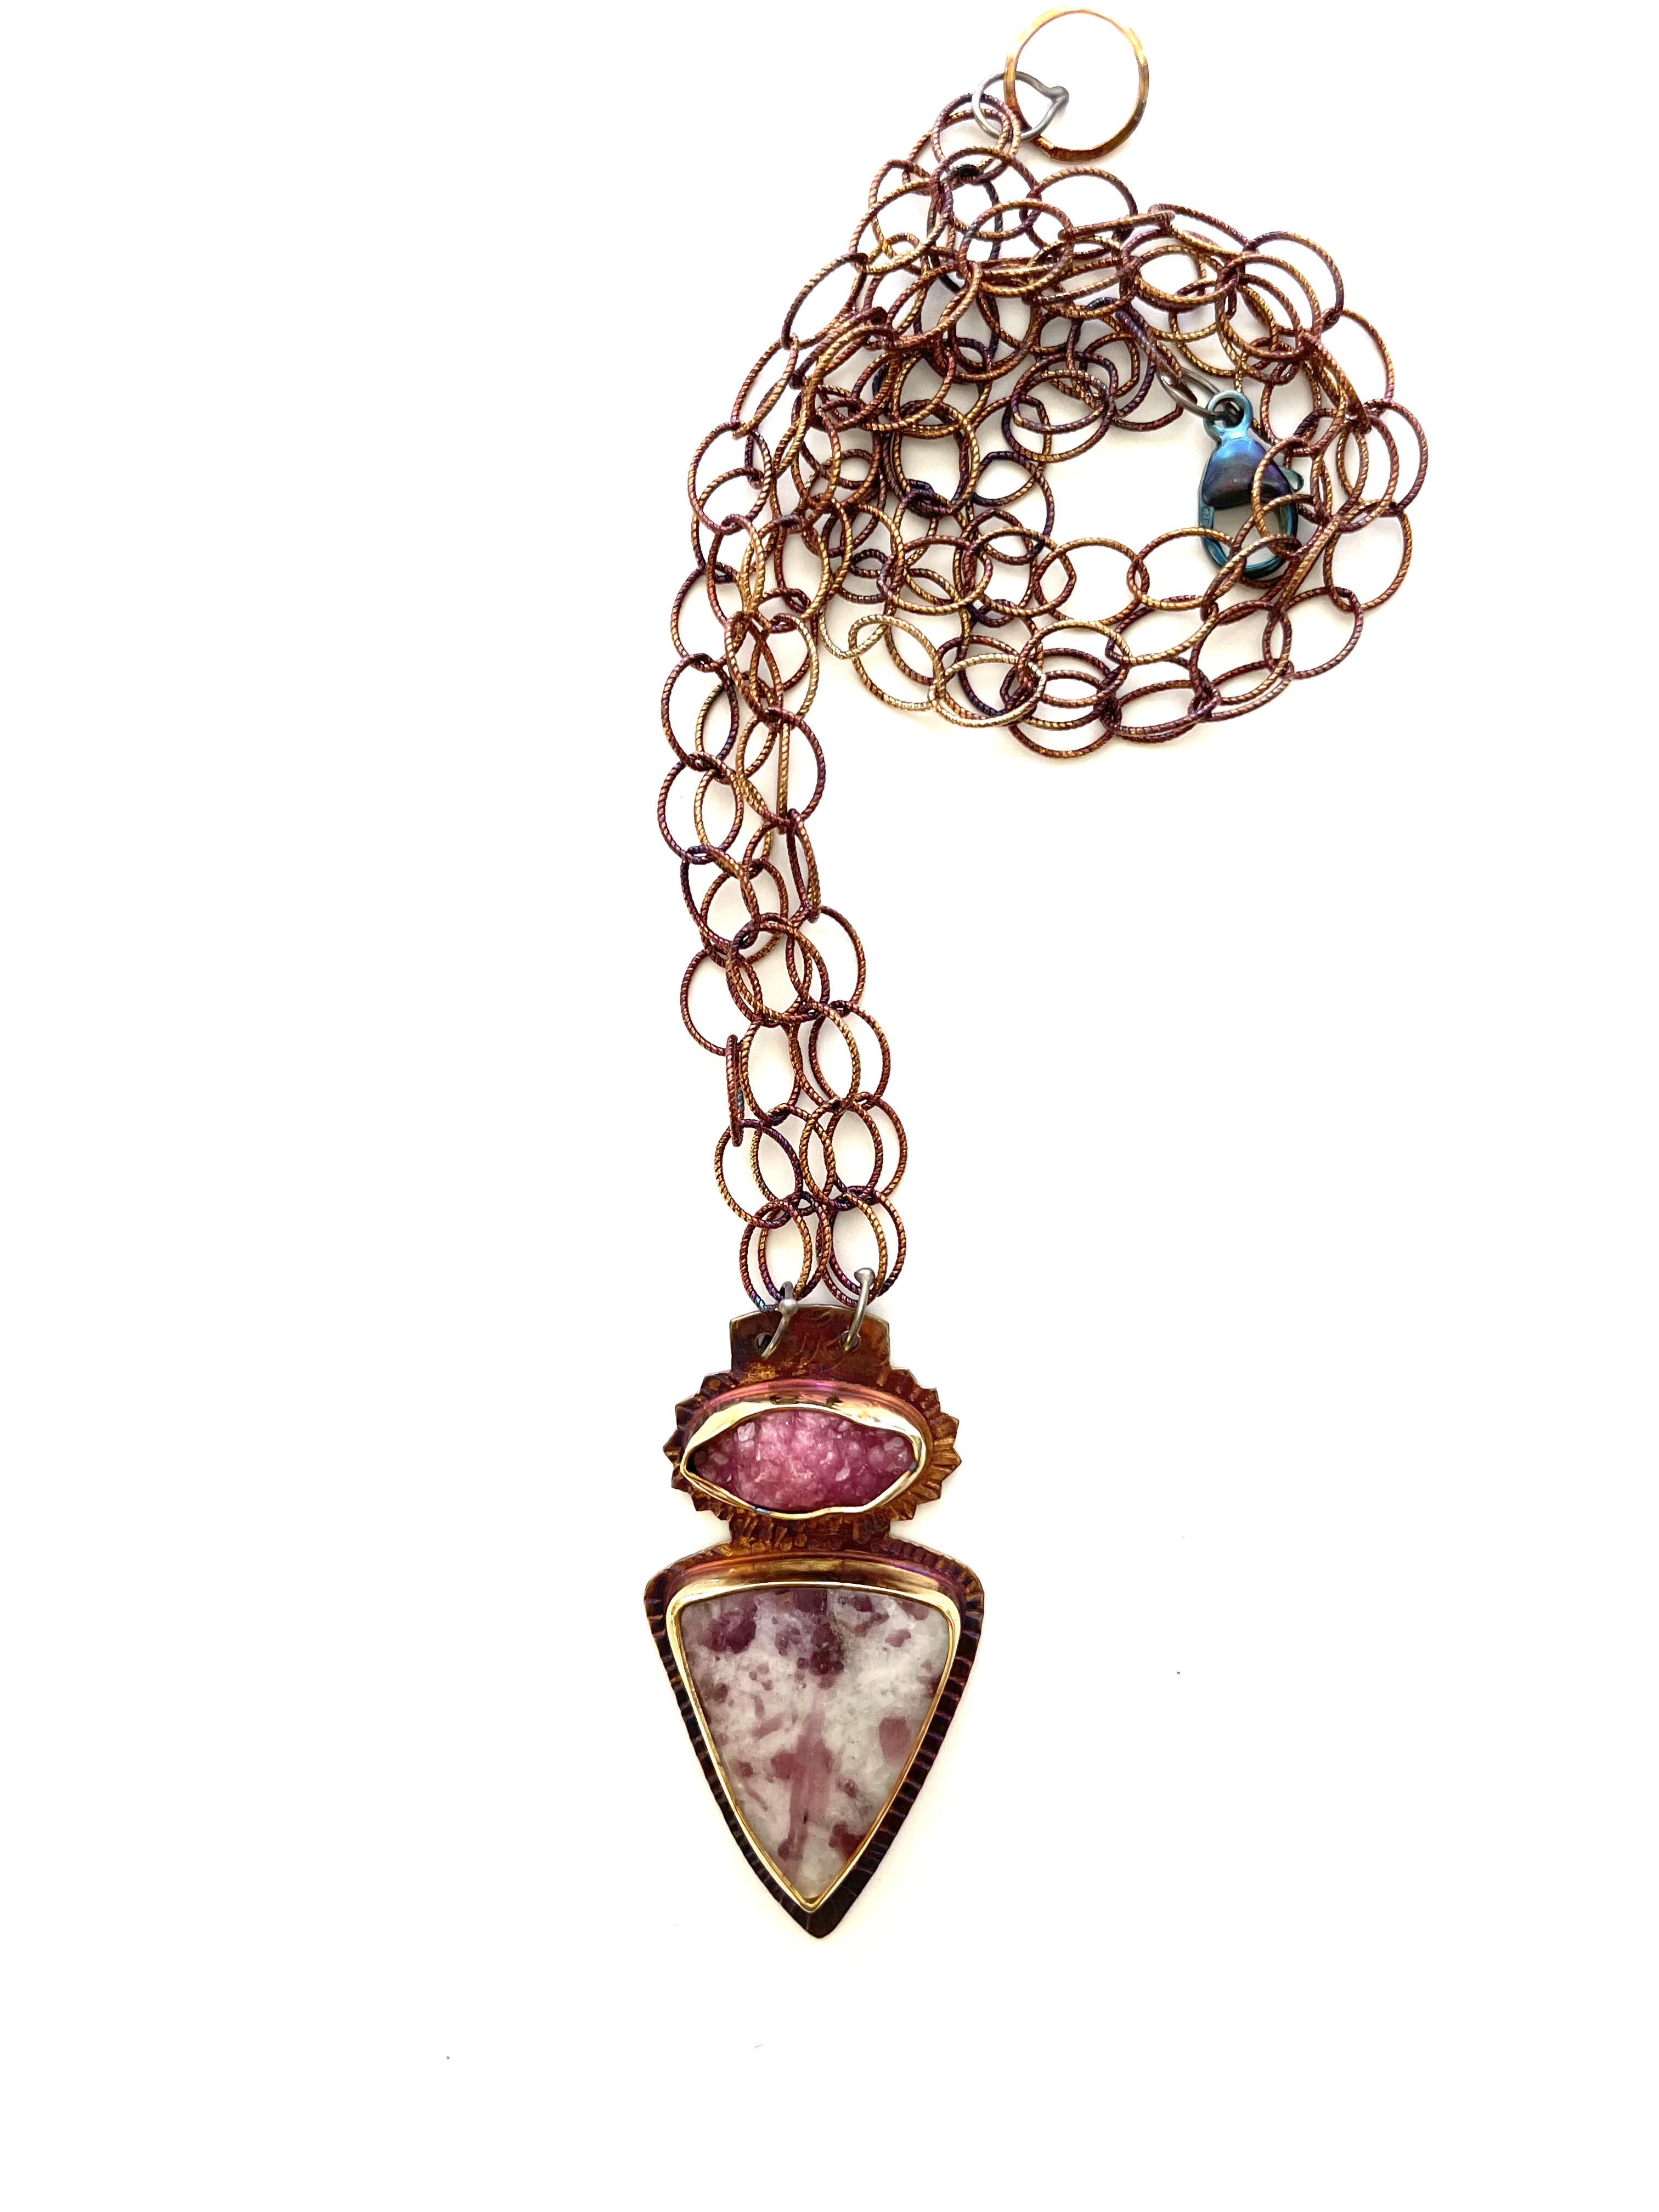 Sterling Silver, Cobalto Calcite Druzy, and Pink Tourmaline in Quartz Necklace